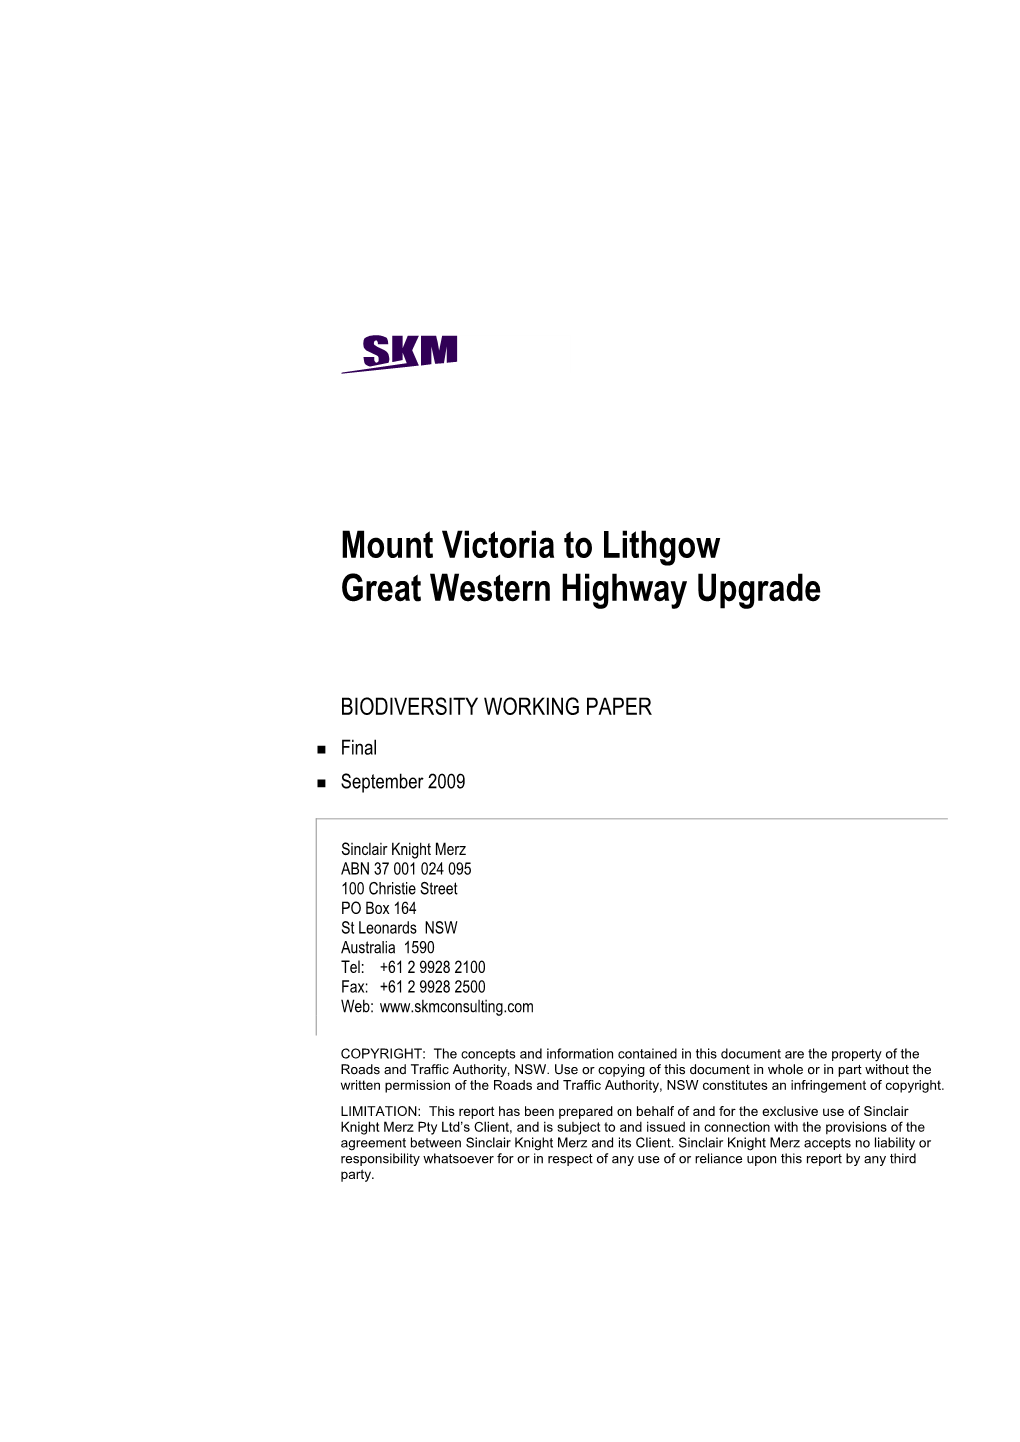 Mount Victoria to Lithgow Biodiversity Working Paper